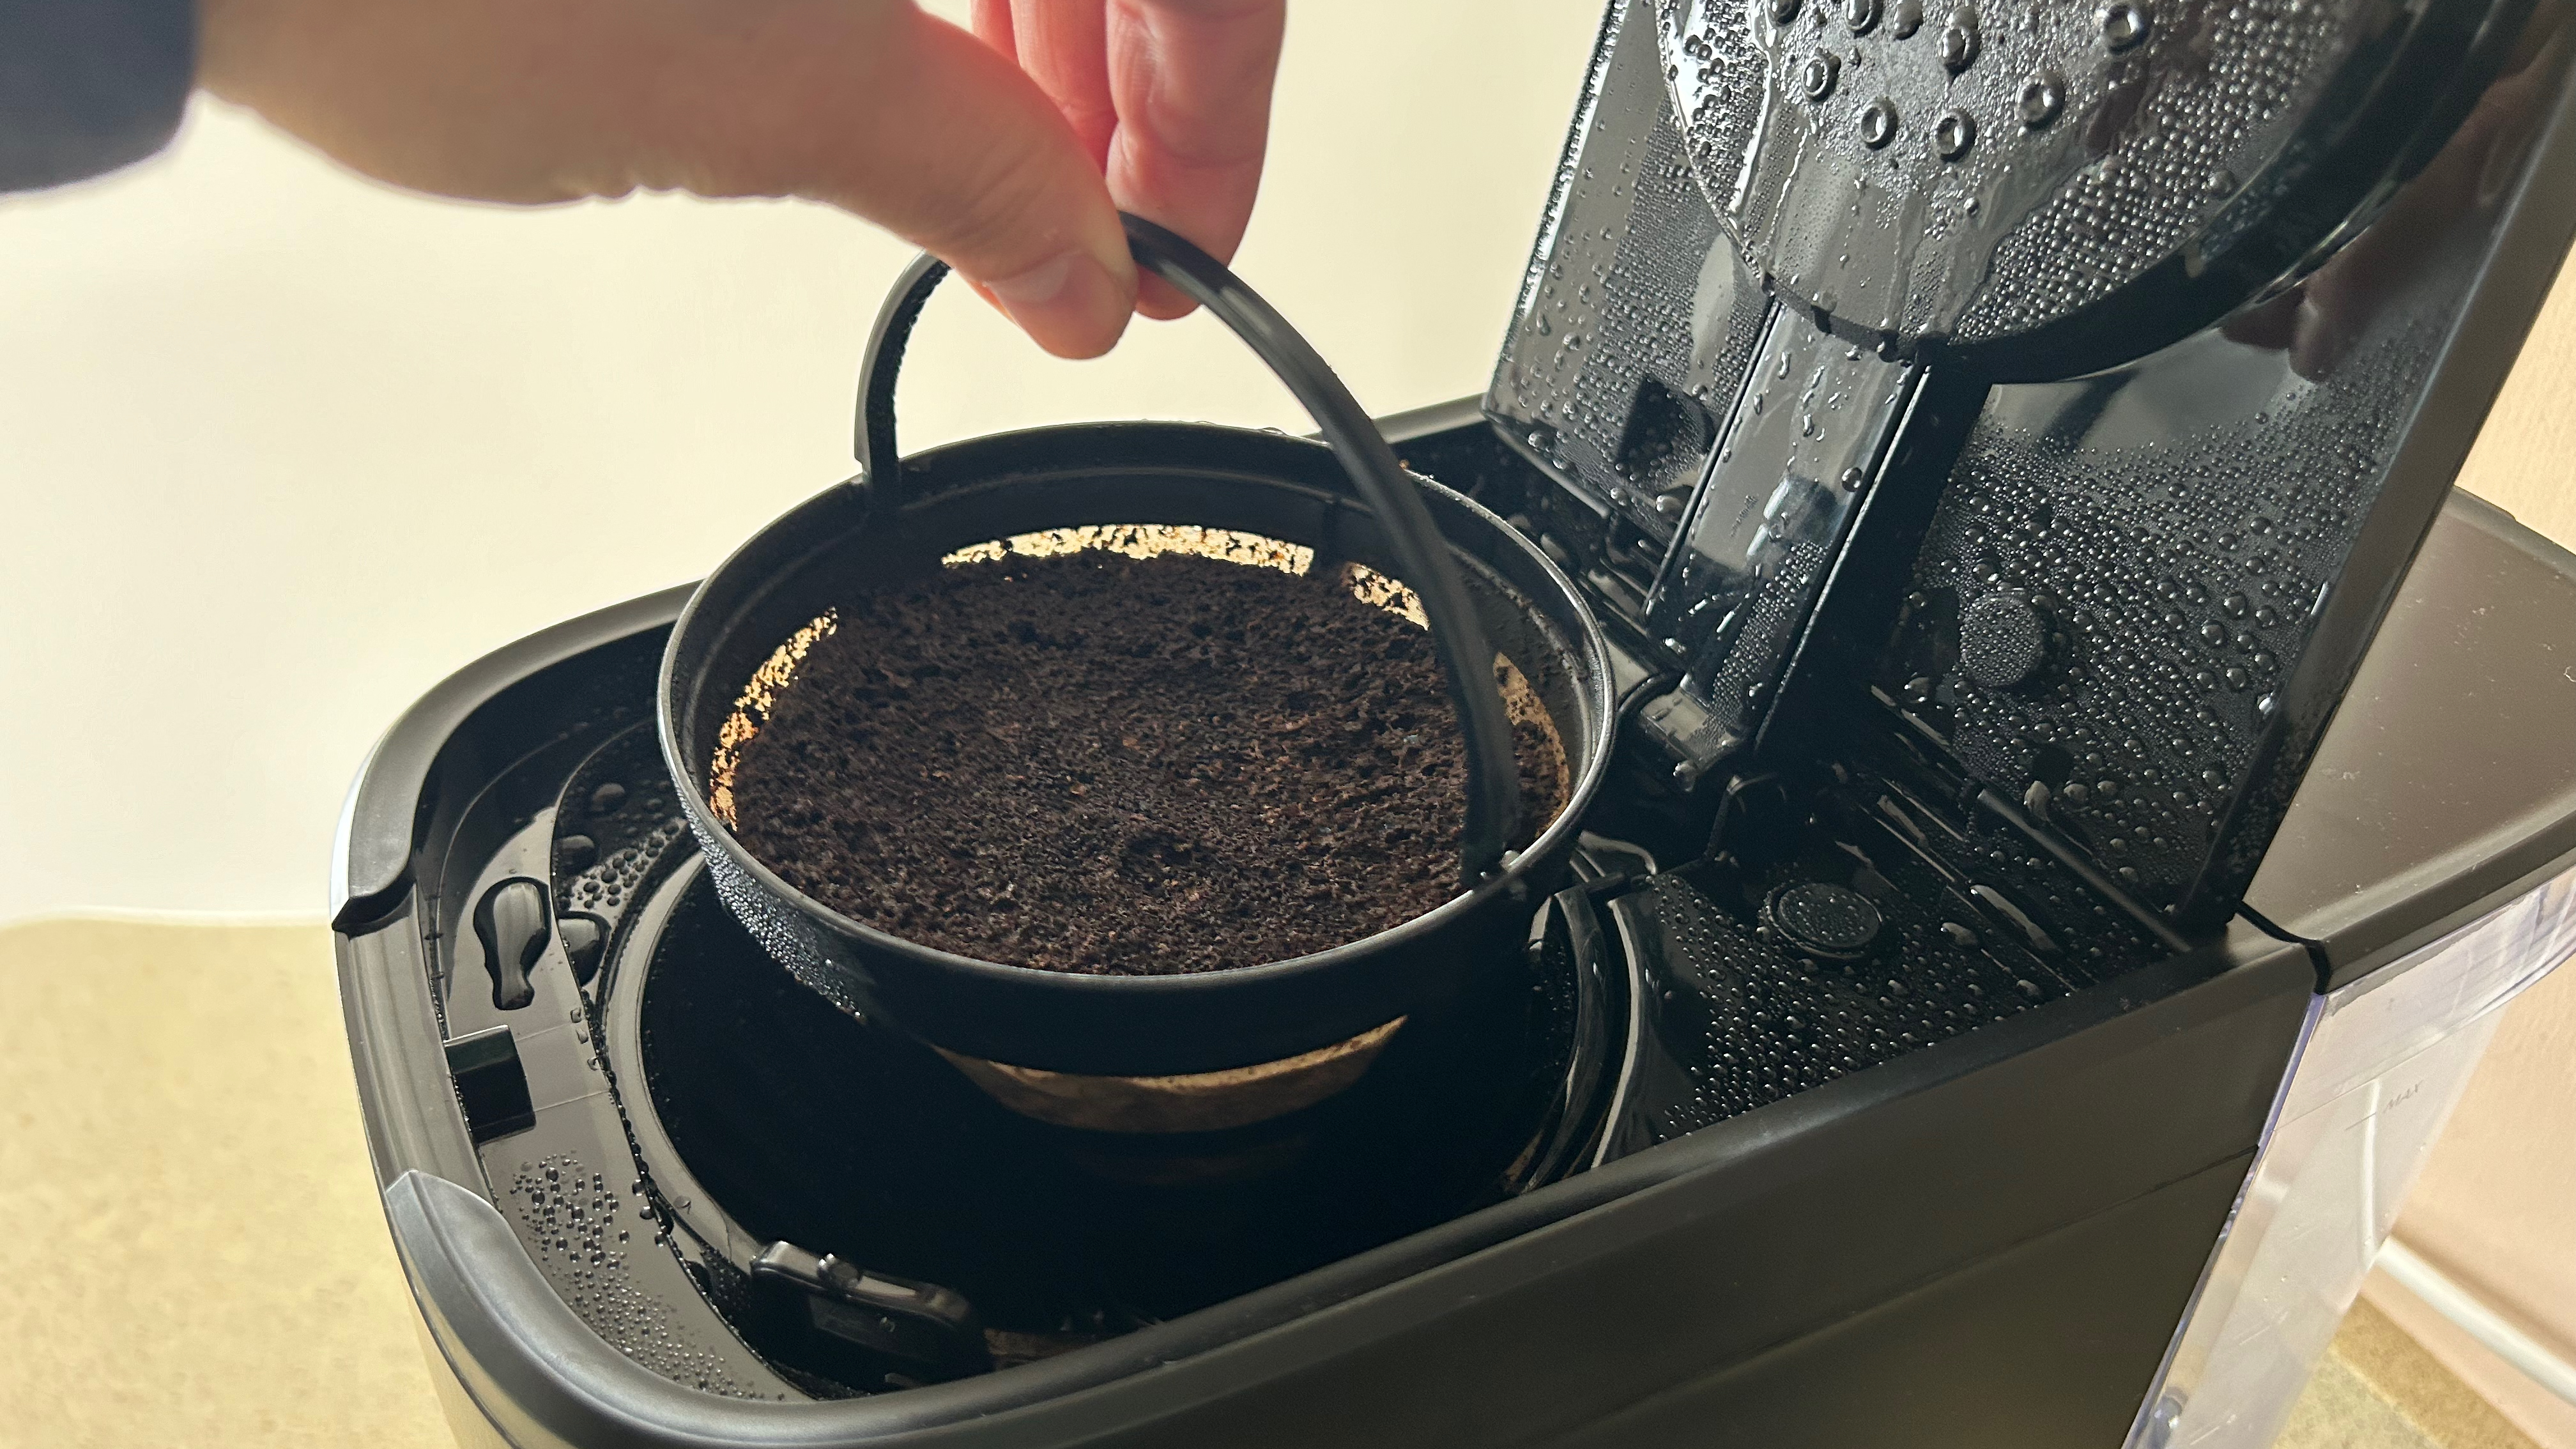 Removable coffee filter in the Instant Infusion Brew coffee maker